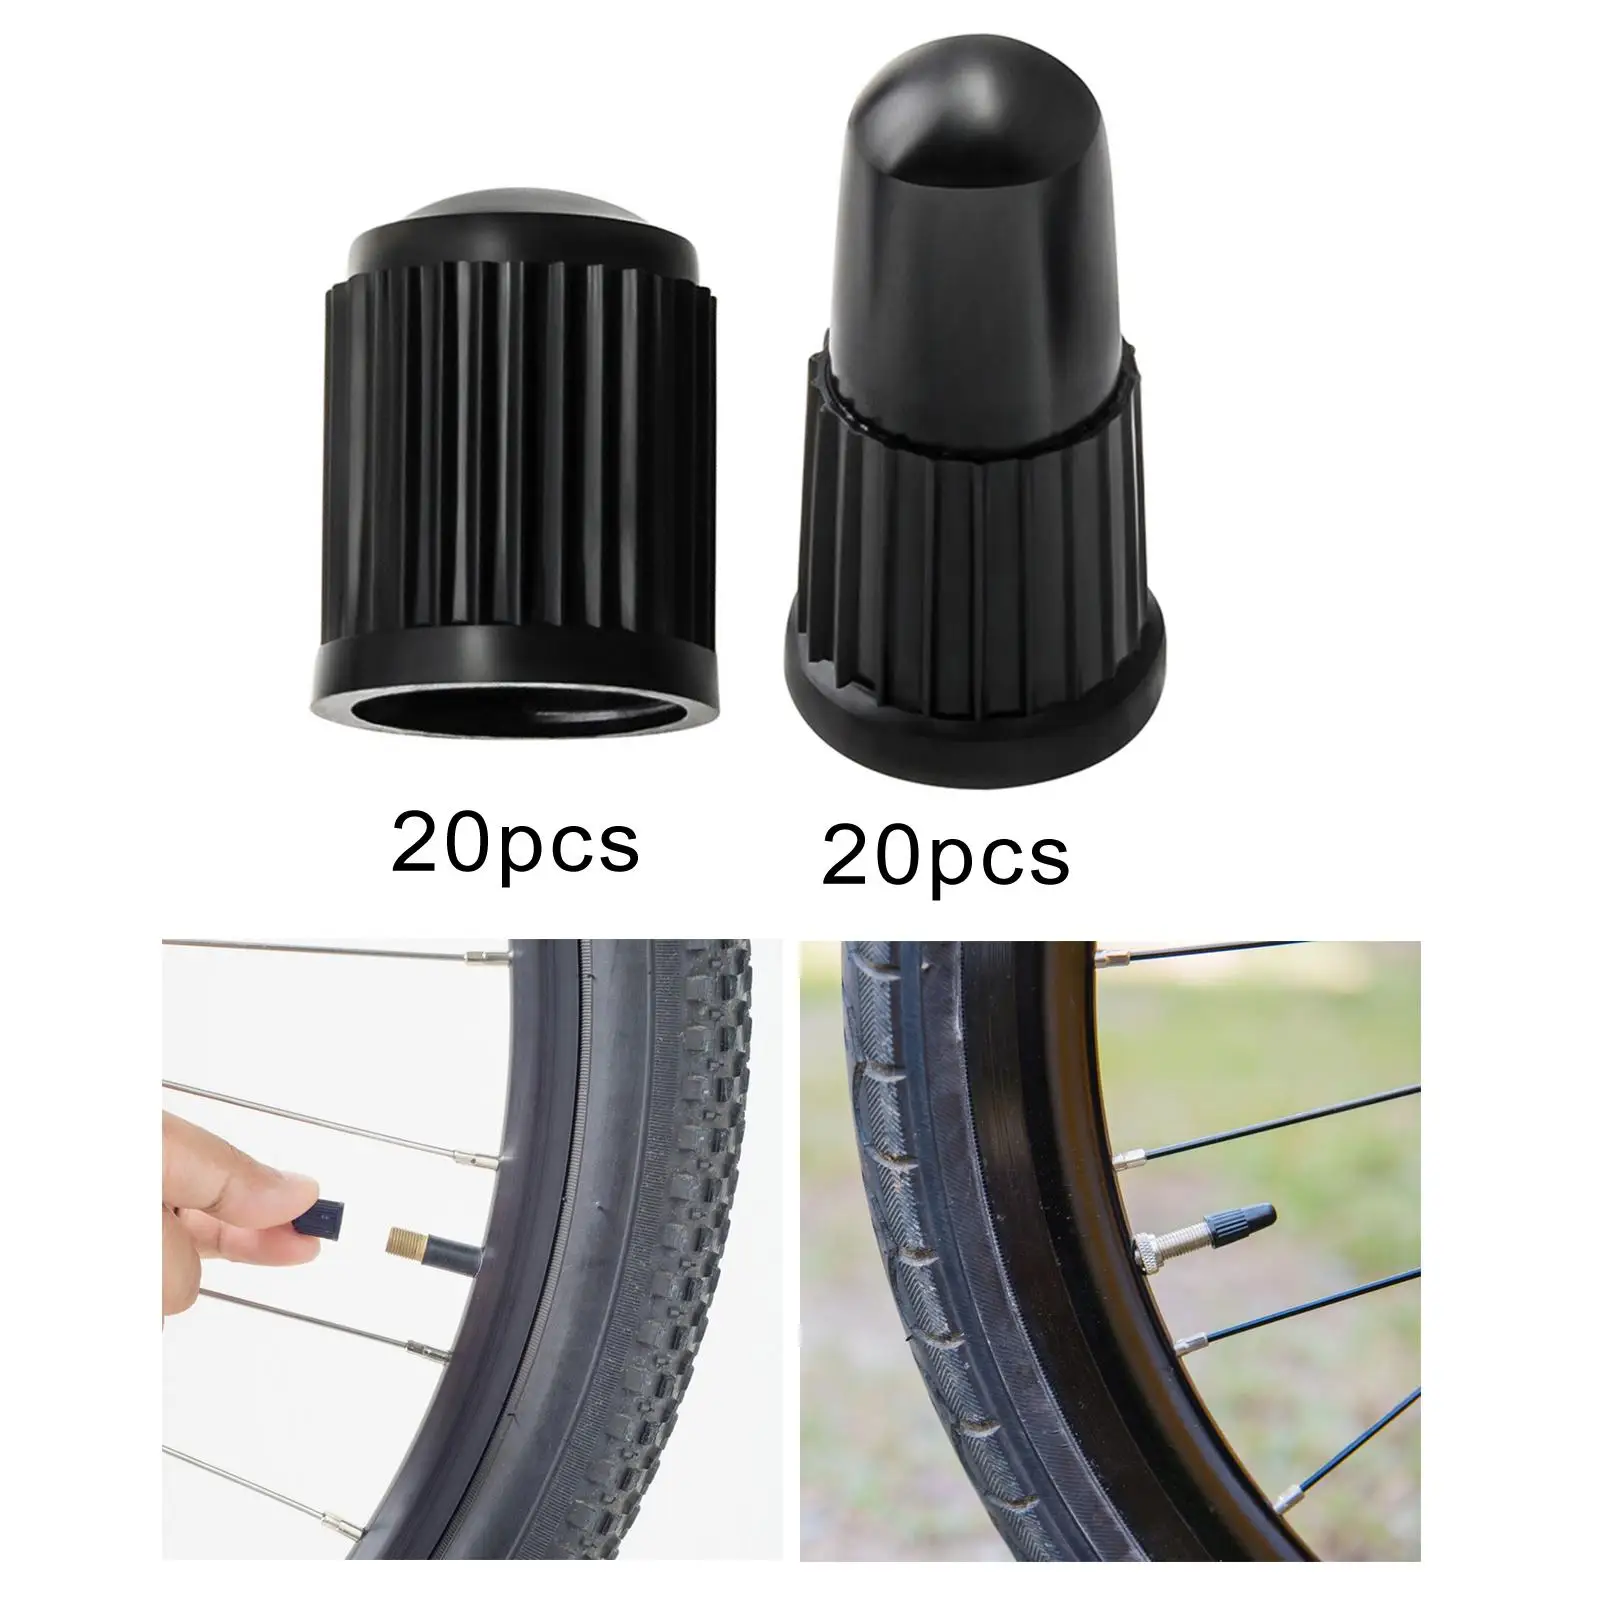 Tire Caps Replacement Tyre Caps for Biking Cycling Outdoor